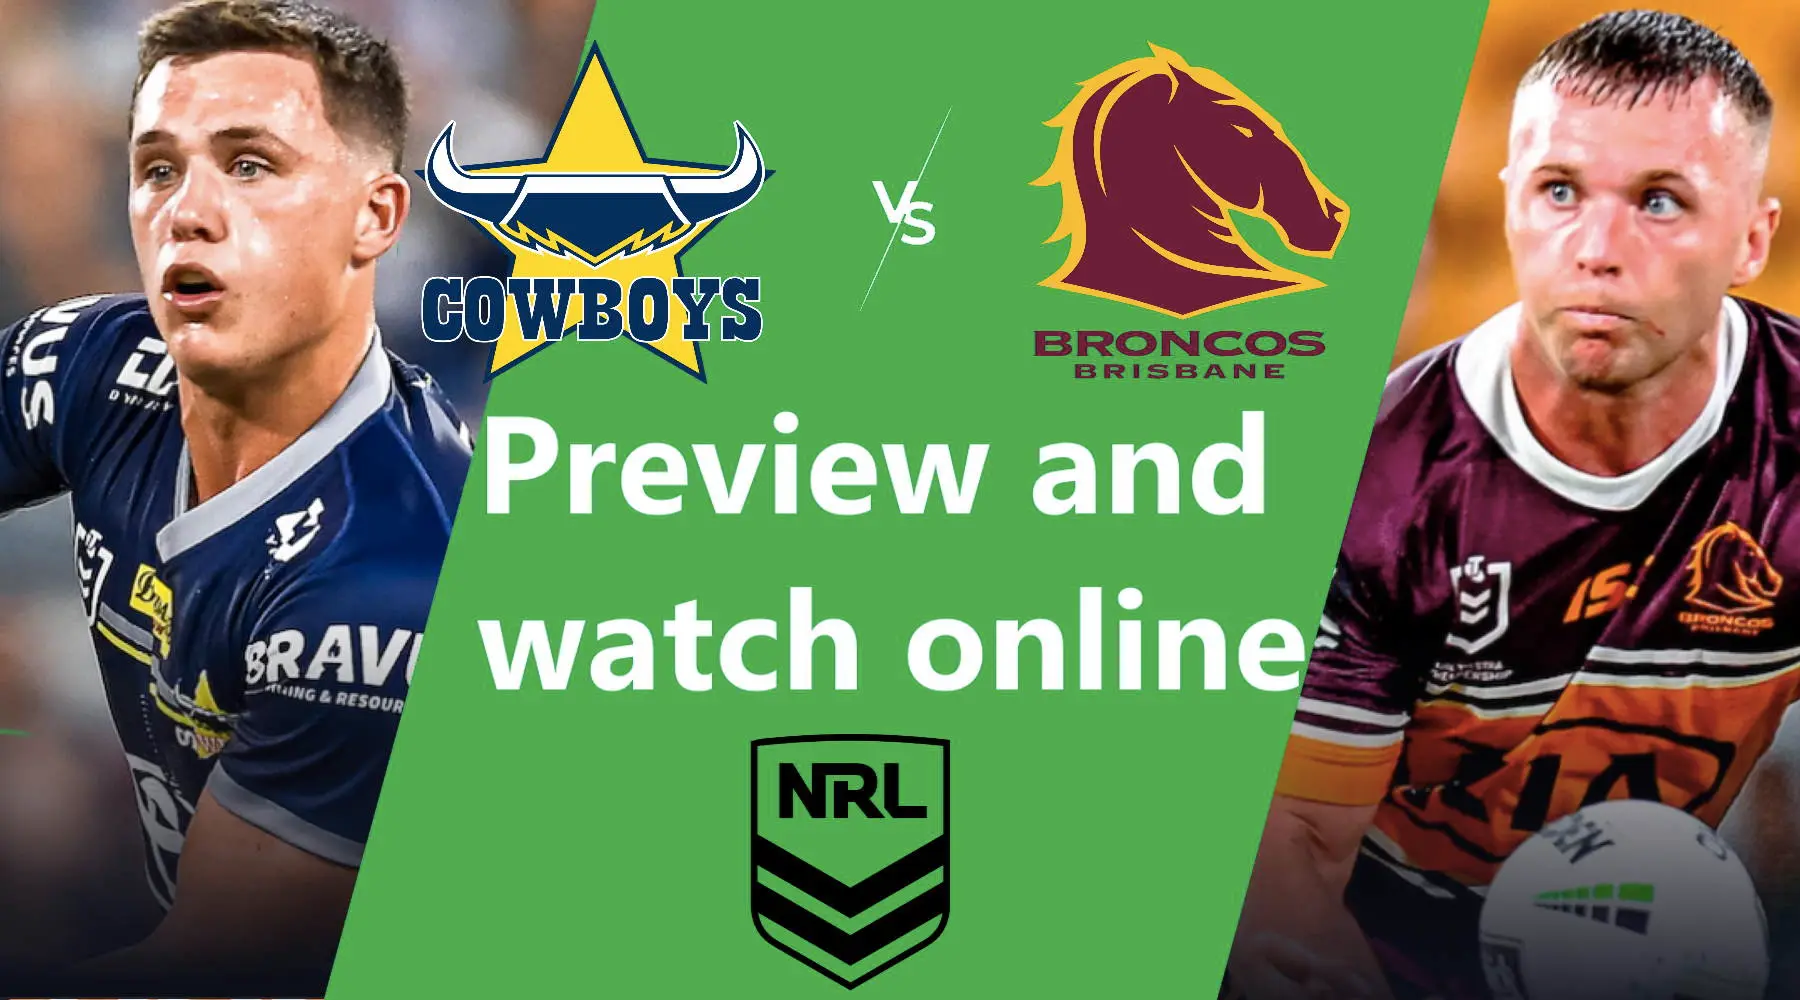 How to watch Cowboys vs Broncos NRL live and match preview